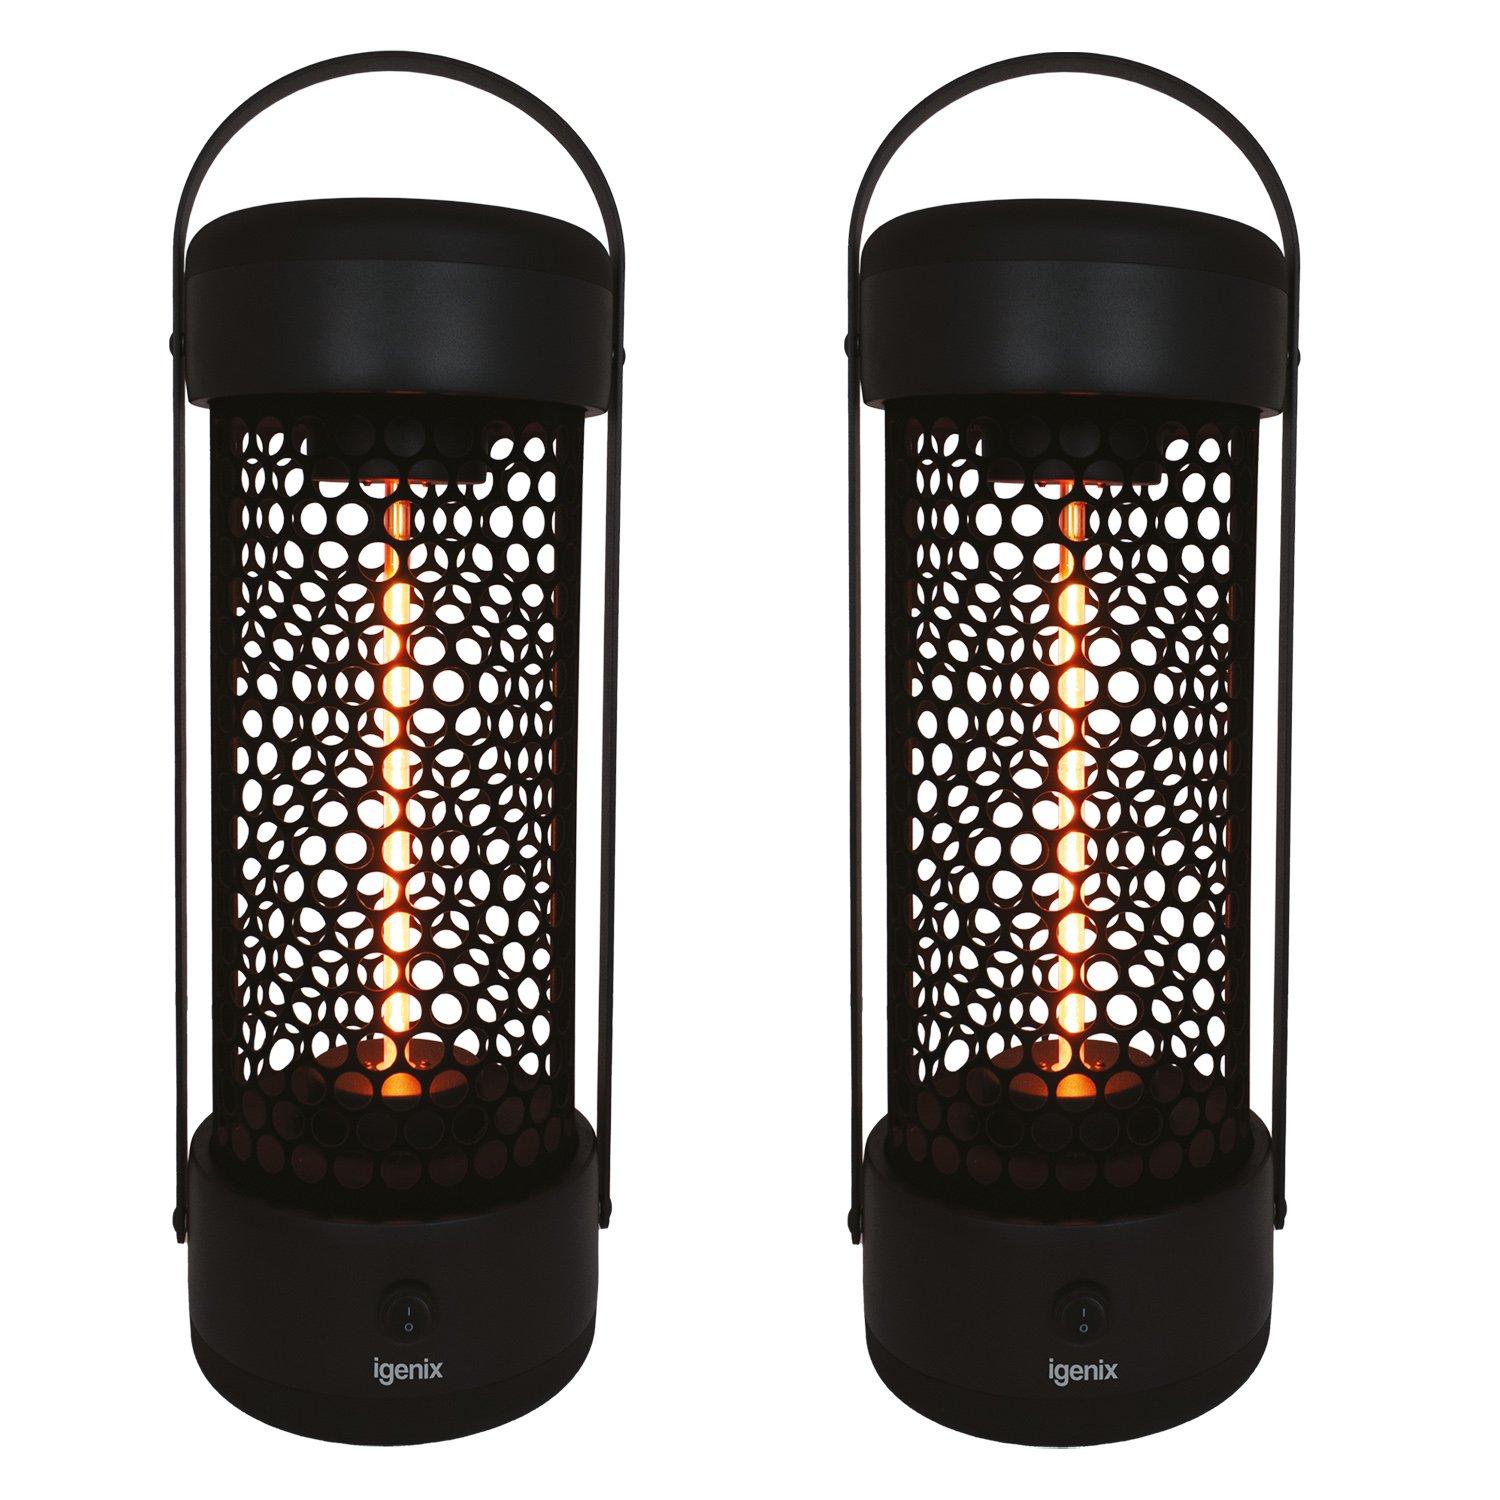 Portable Electric OutdoorTower Heater (2 Pack)